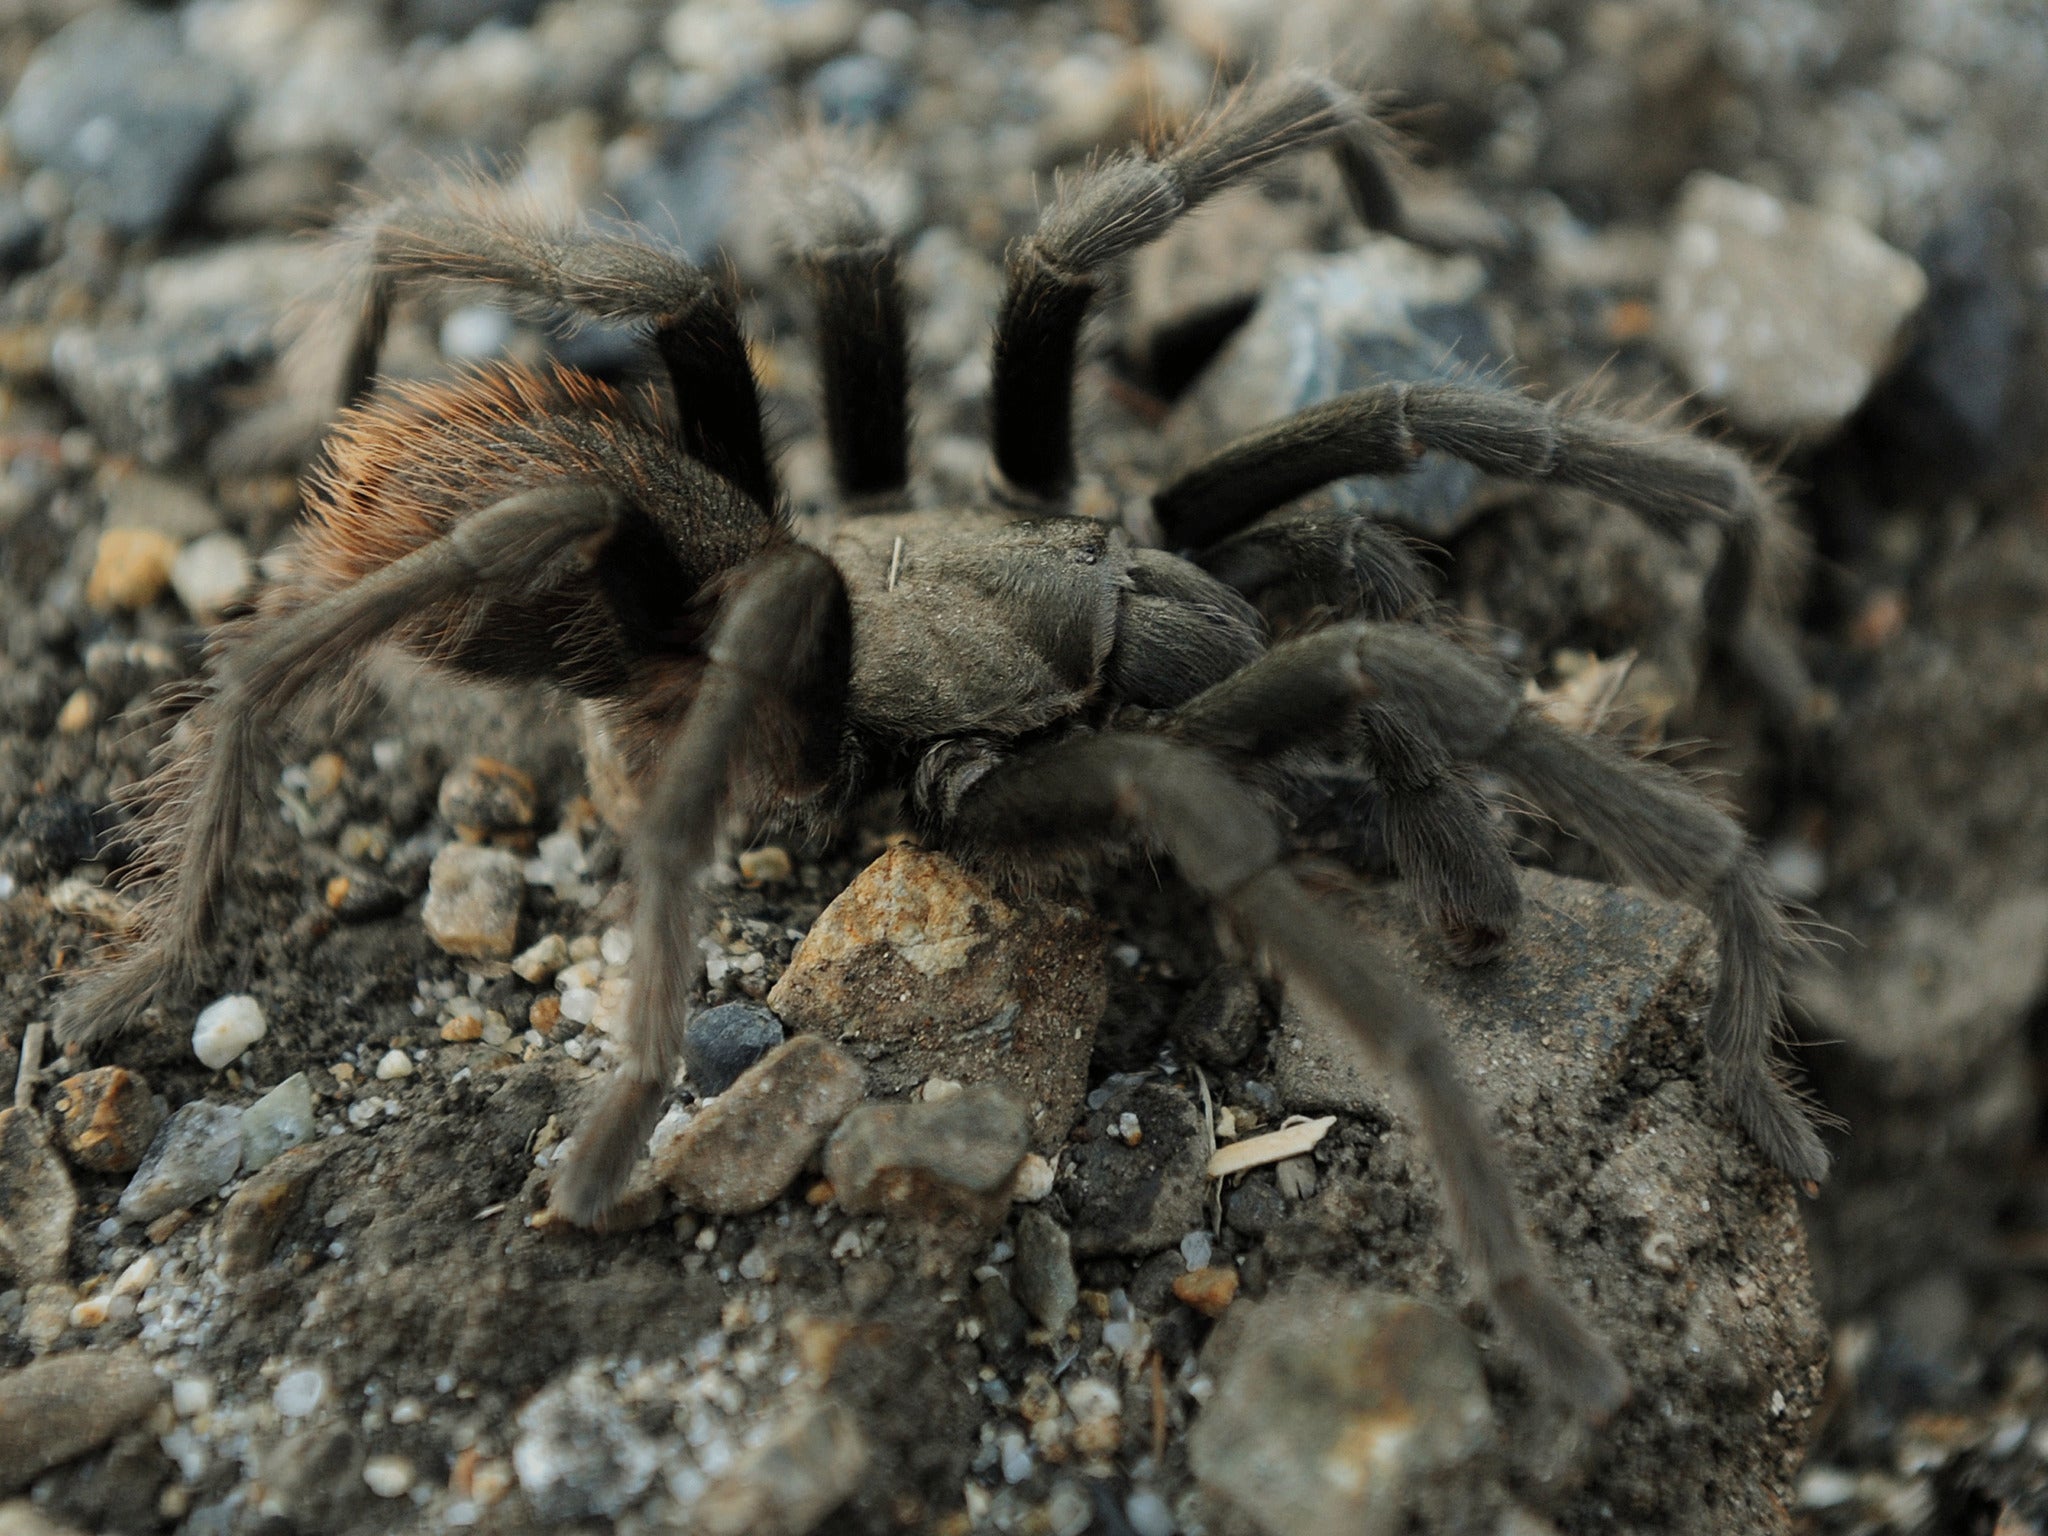 There are over 40,000 species of spider